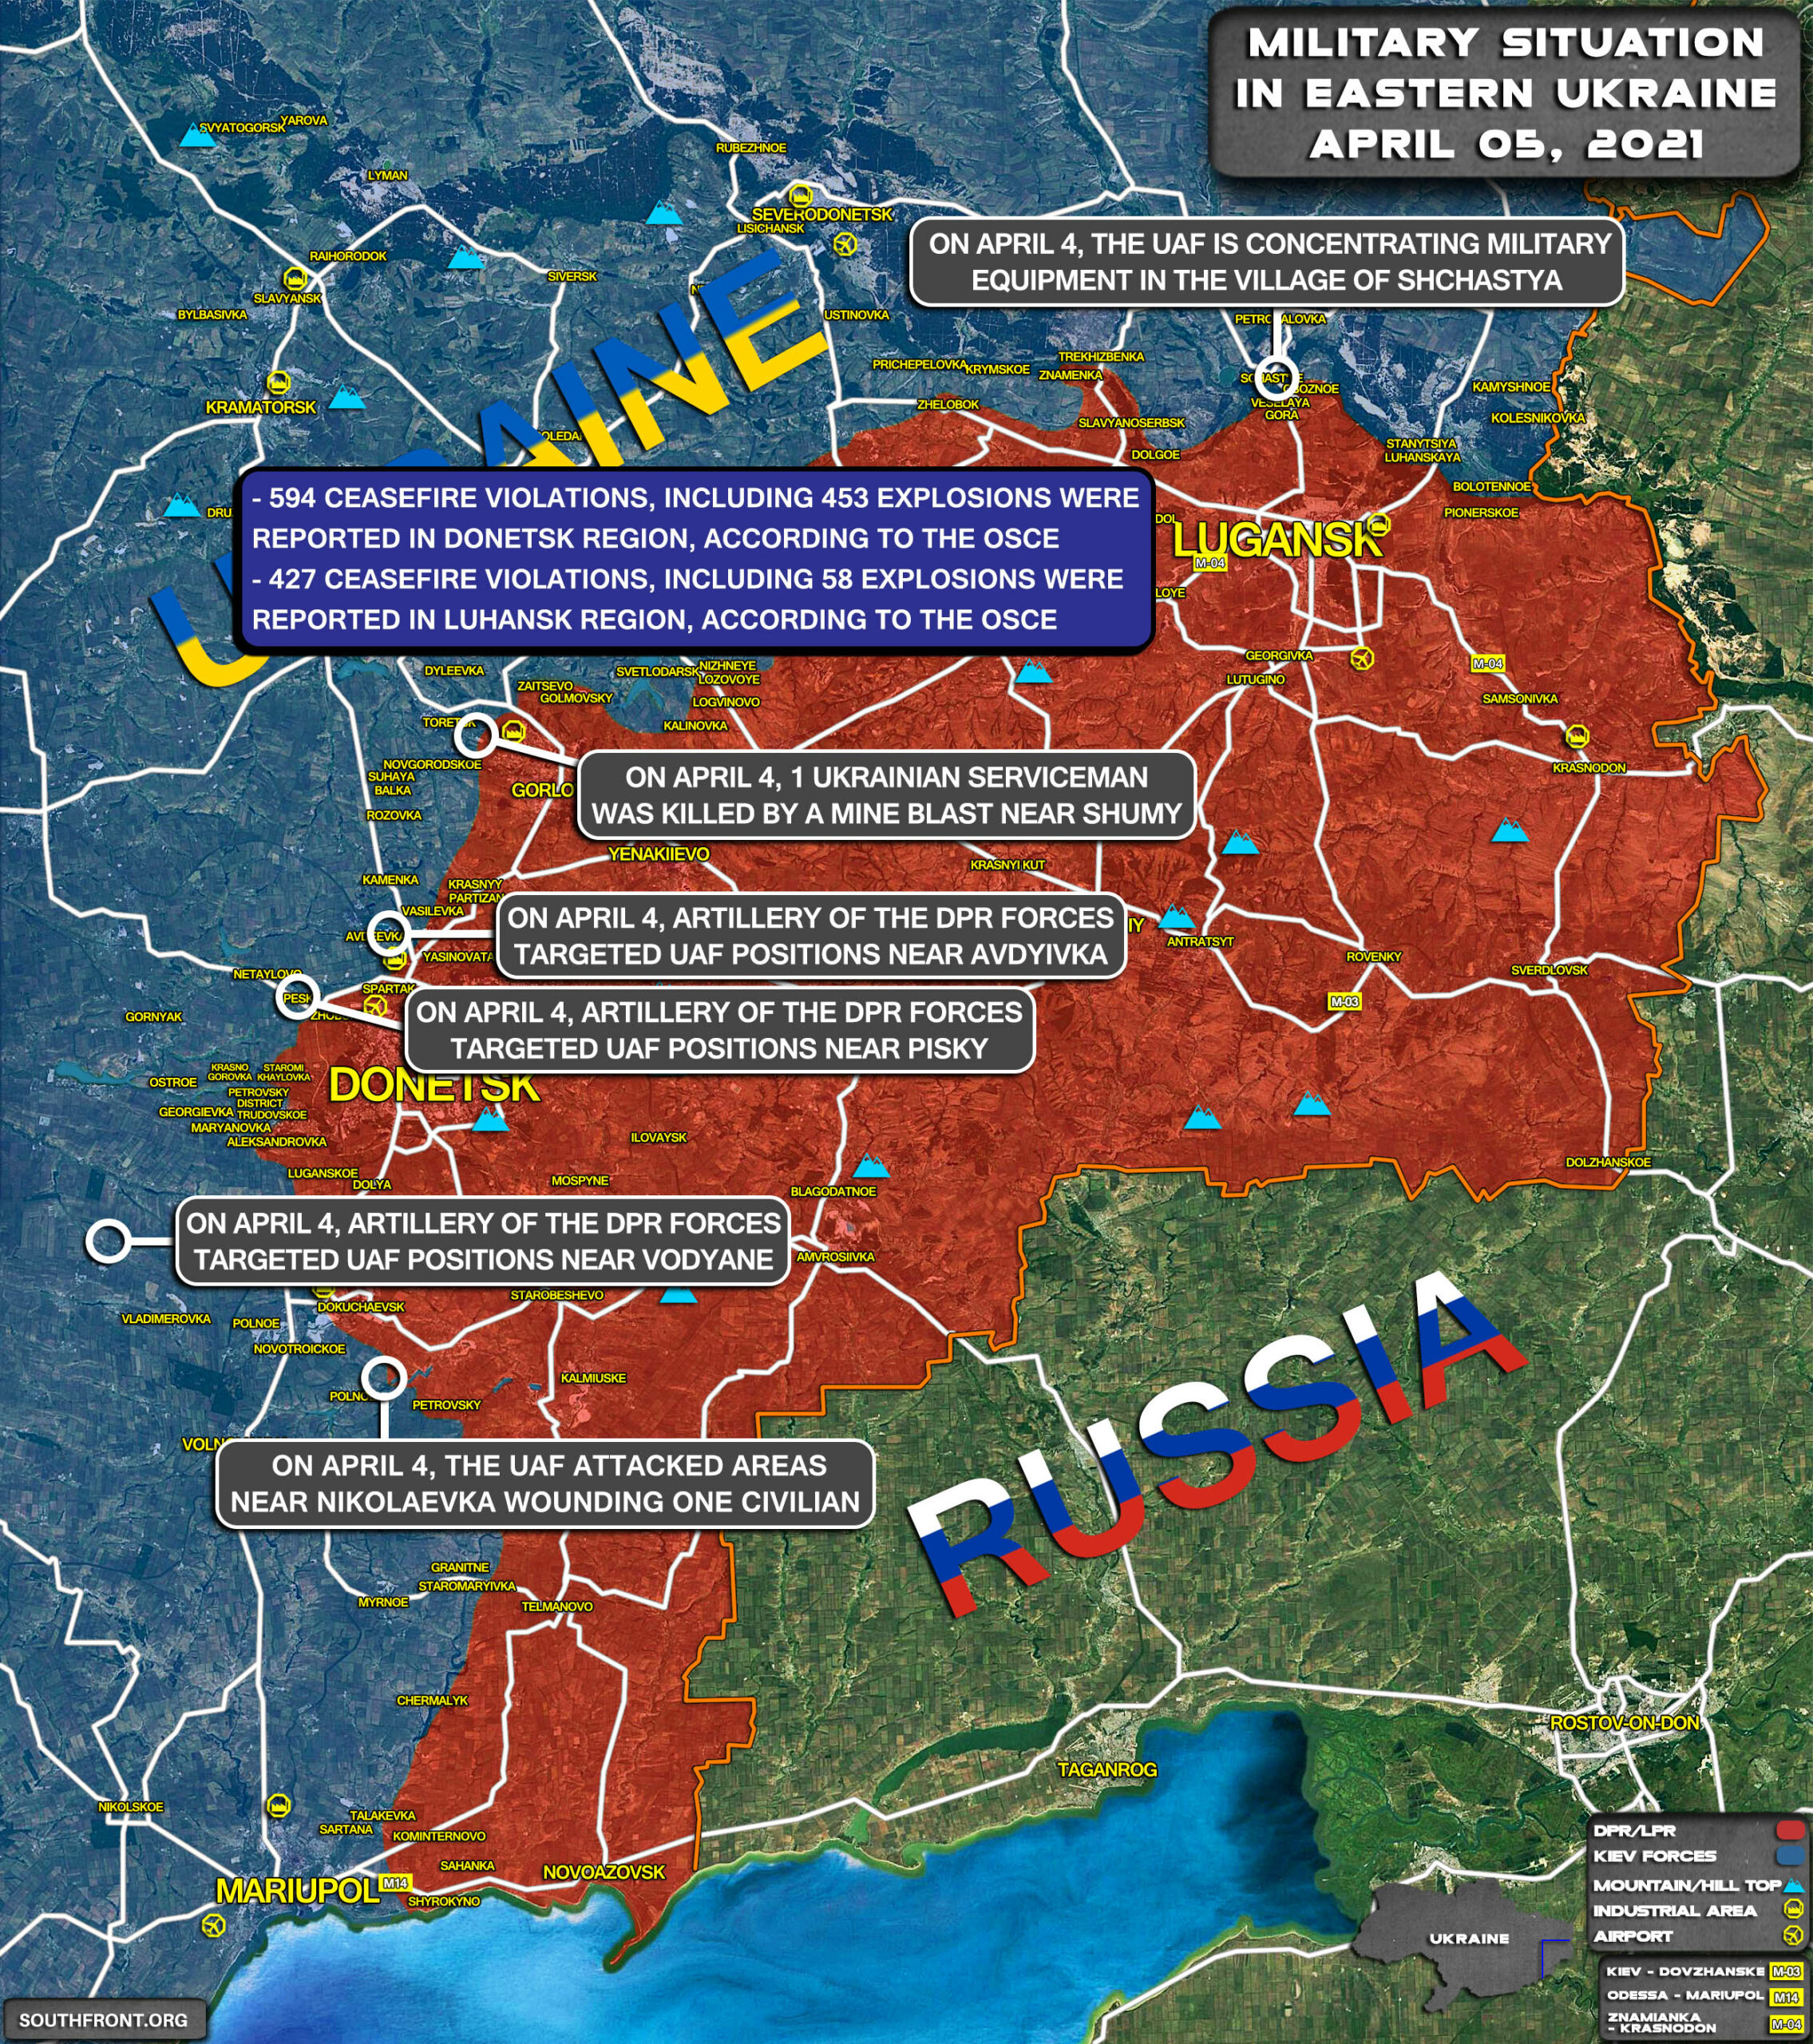 Kiev Continues On The War Path, Emboldened By False Promises. (Map Update)